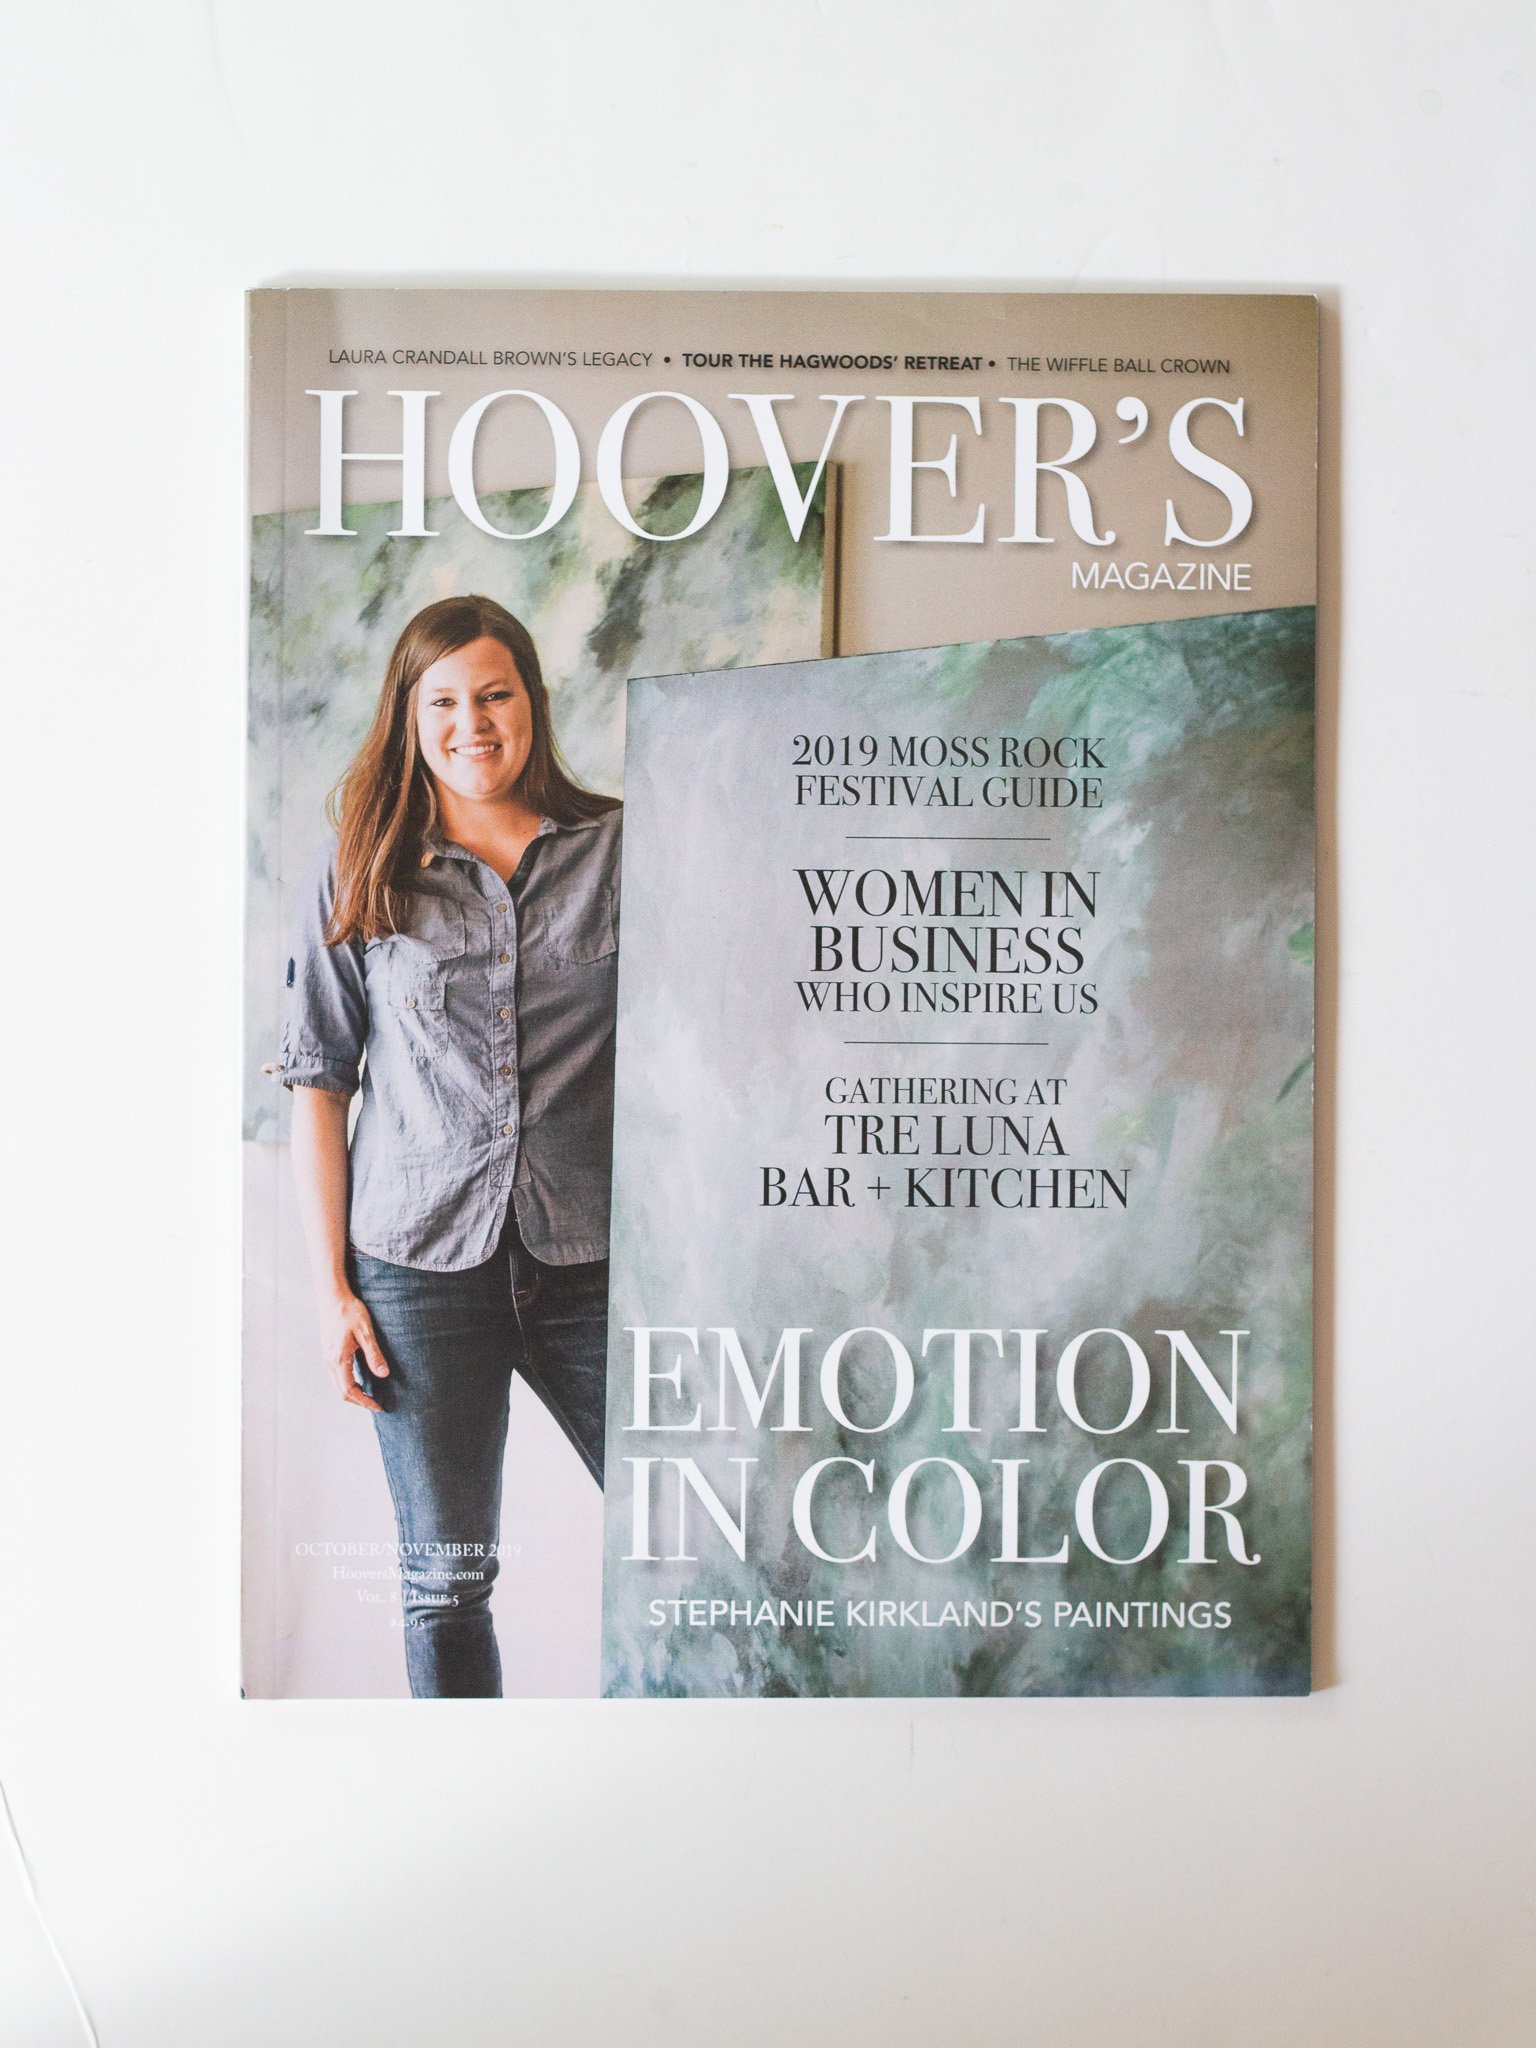  Hoover’s Magazine, Fall 2019 